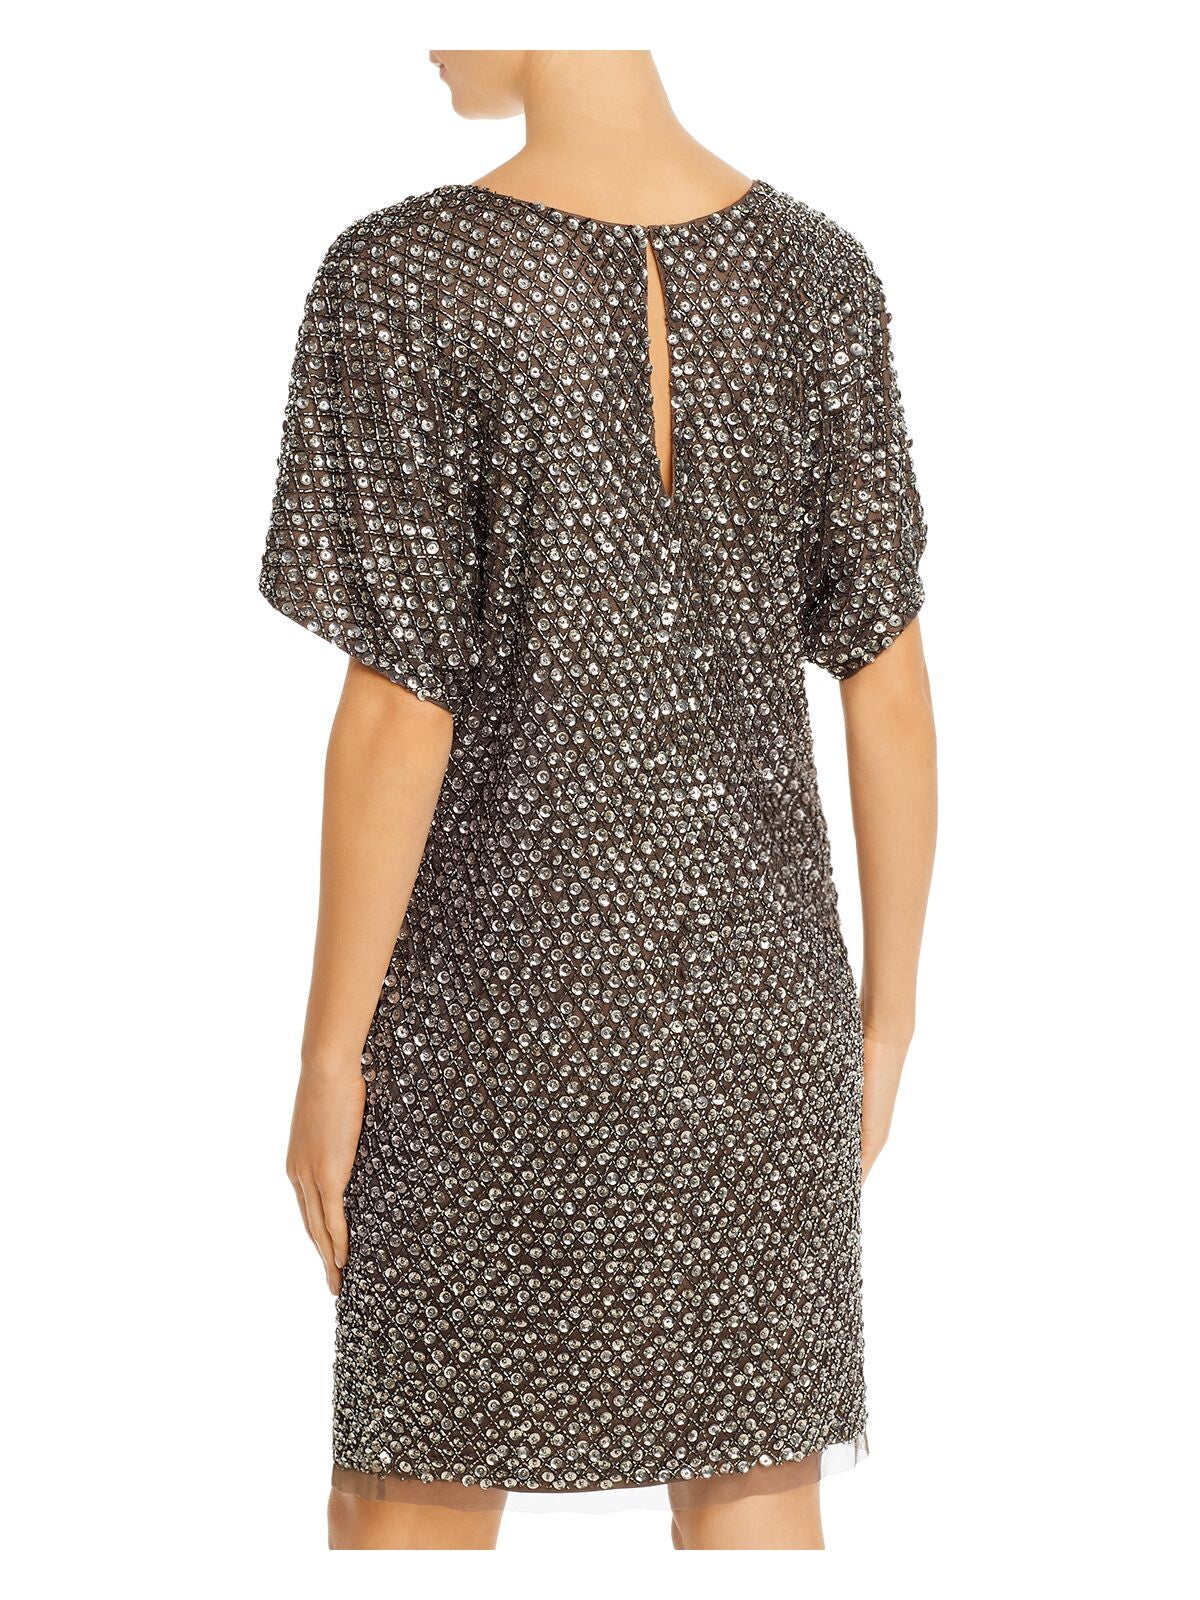 AIDAN MATTOX Womens Silver Beaded Sequined Embellished Metallic Short Sleeve V Neck Above The Knee Party Shift Dress 2